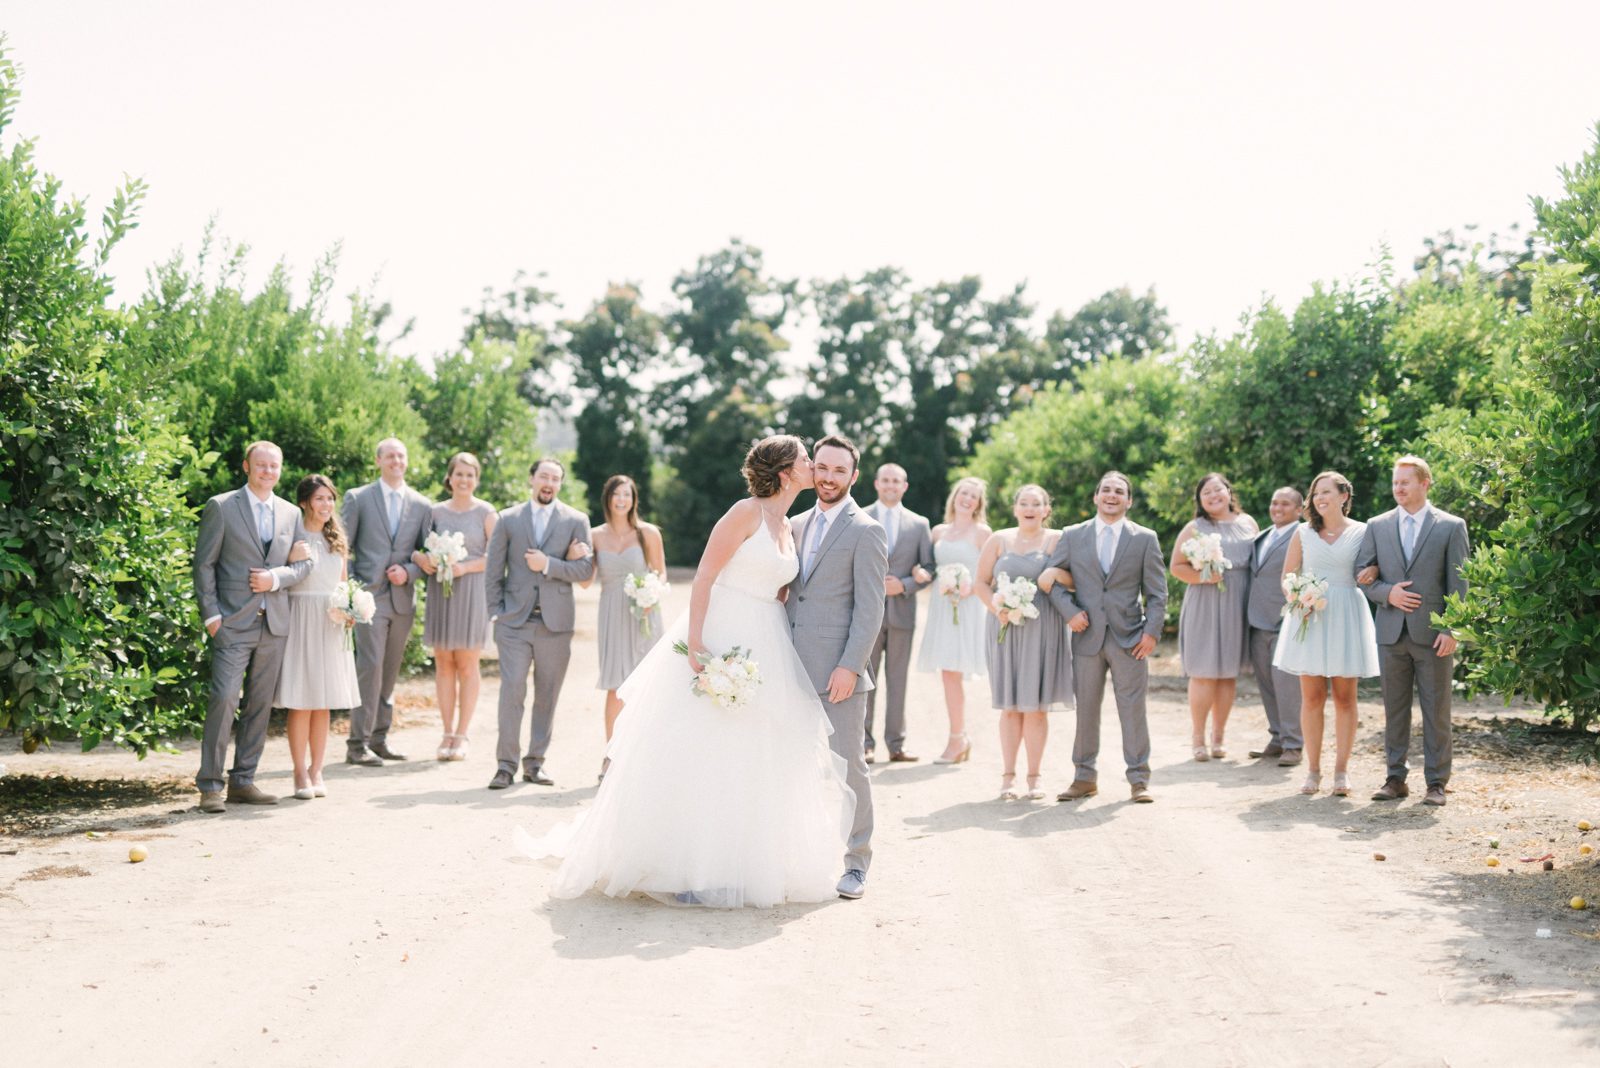 Bride and groom kiss surrounded by bridal party at Limoneira Ranch Wedding by Paso Robles Wedding Photographer Yvonne Goll Photography